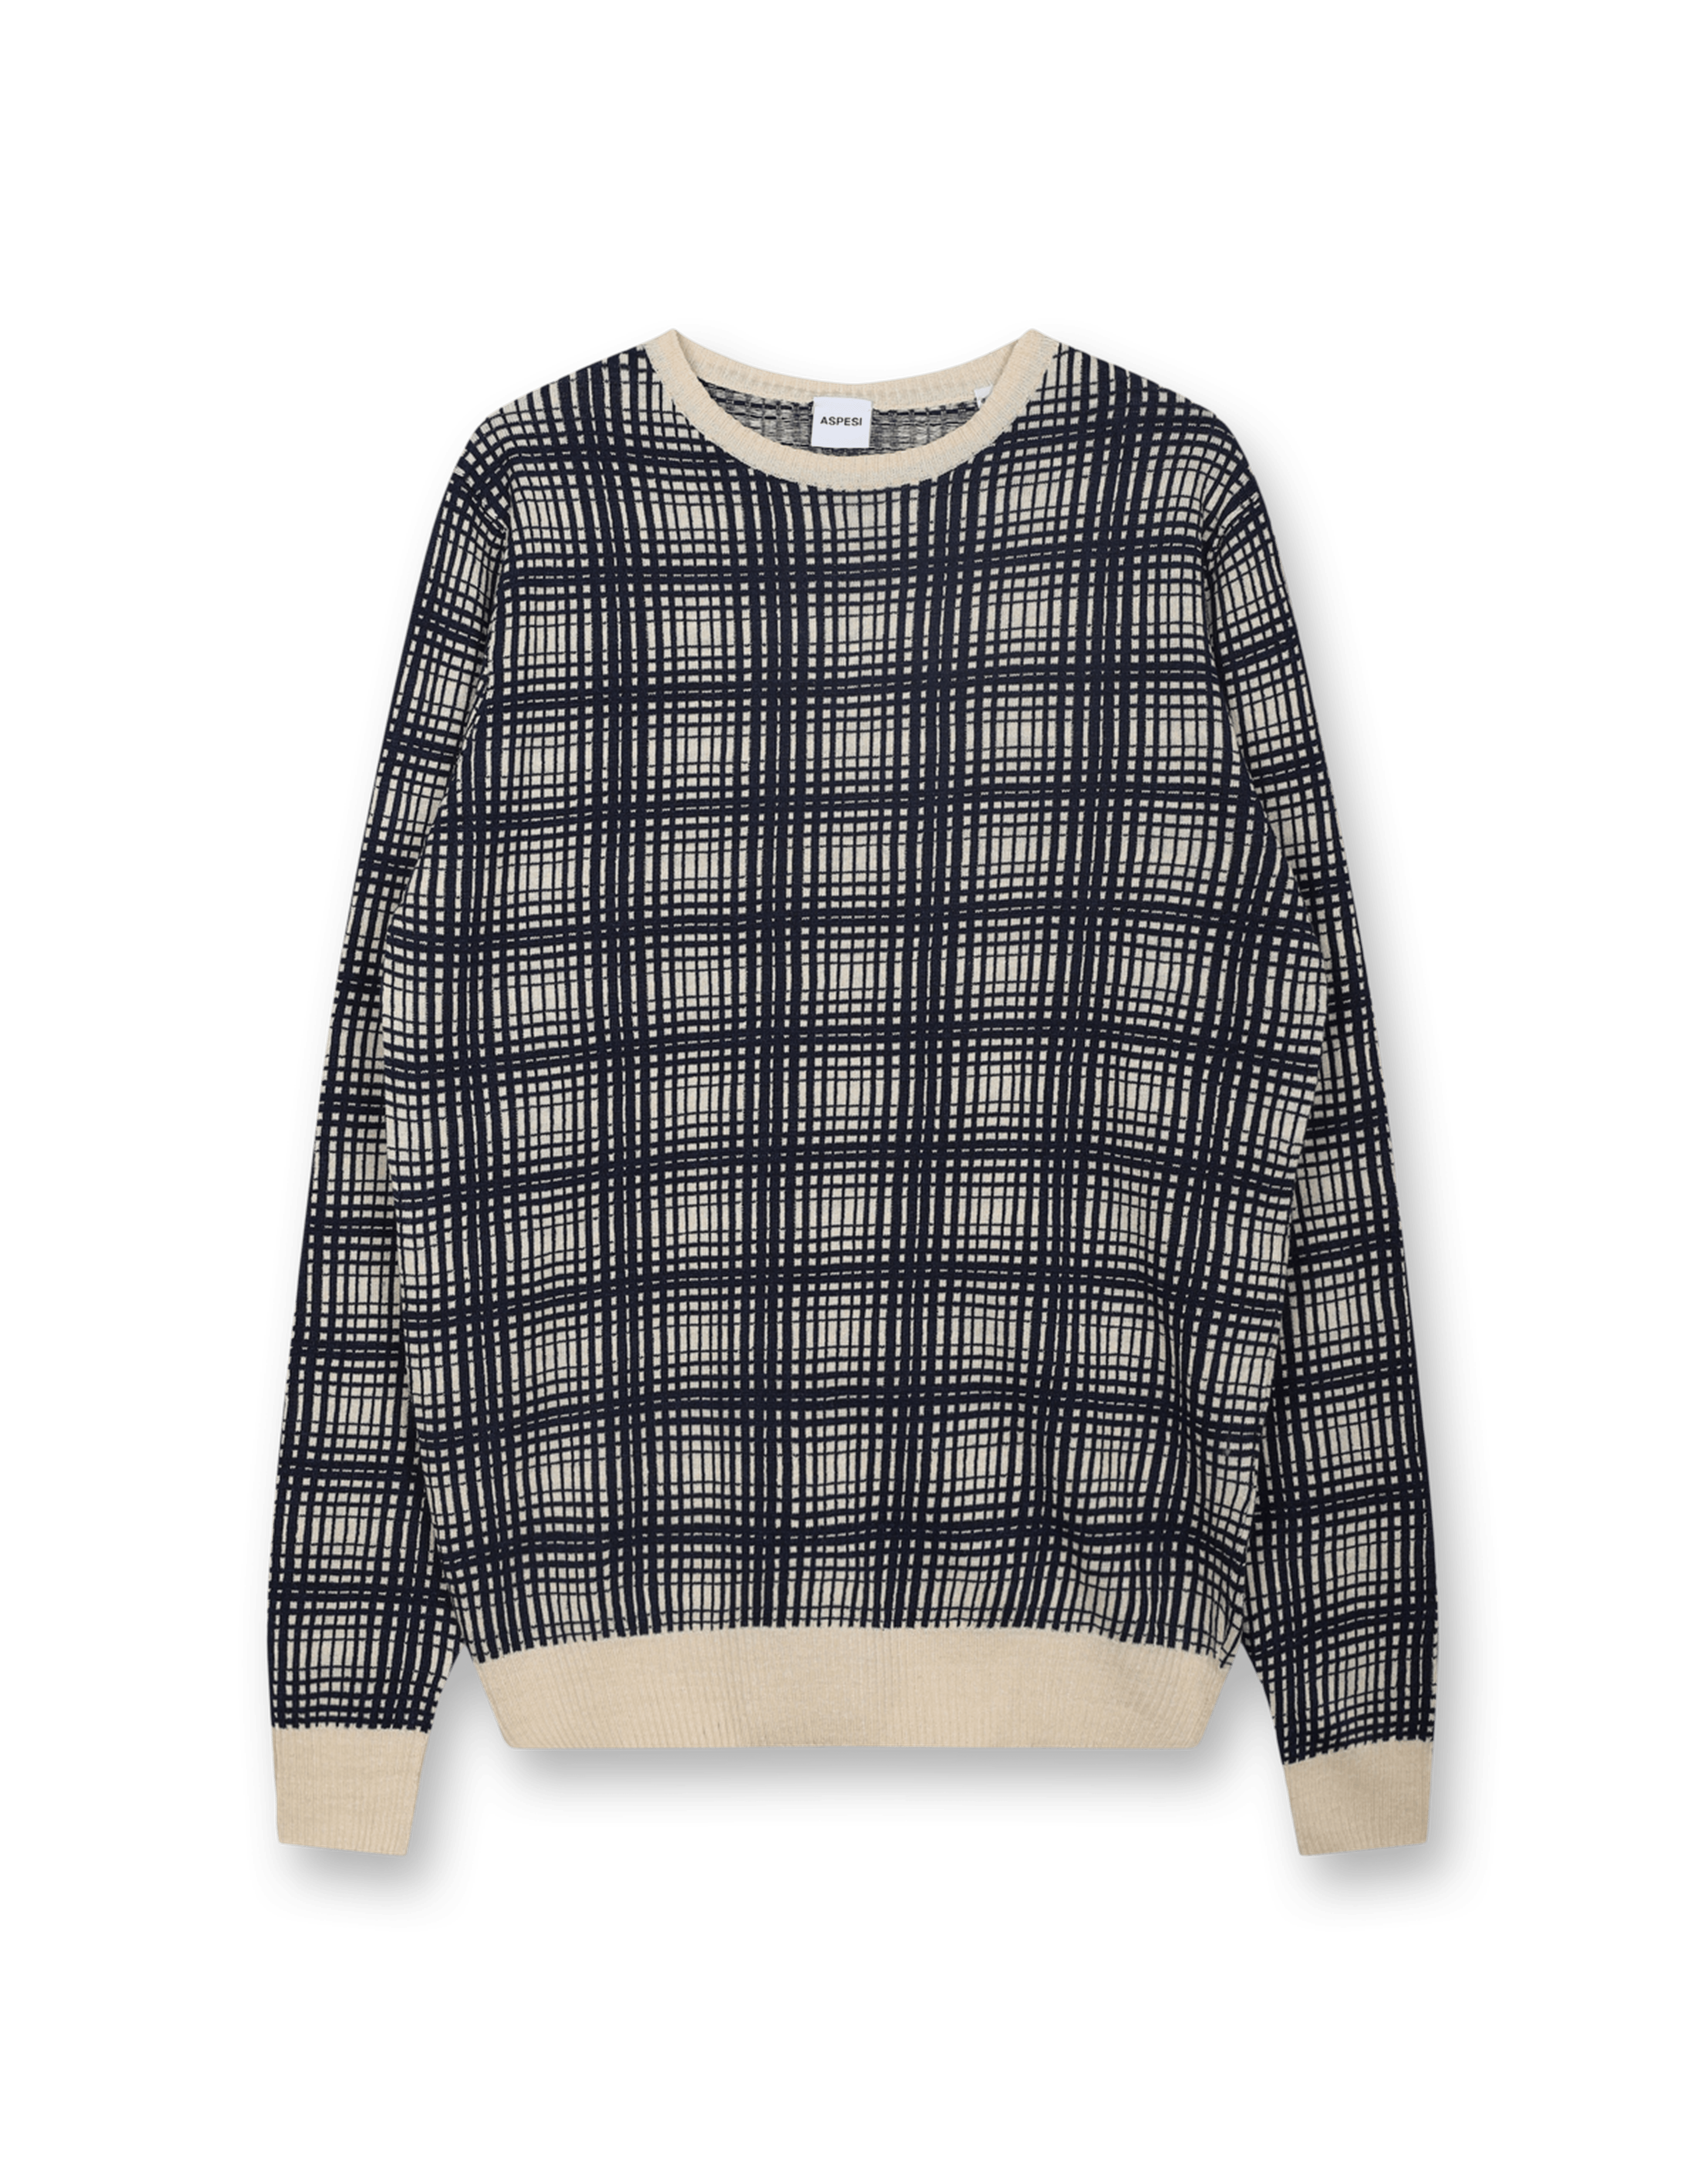 Patterned Sweater